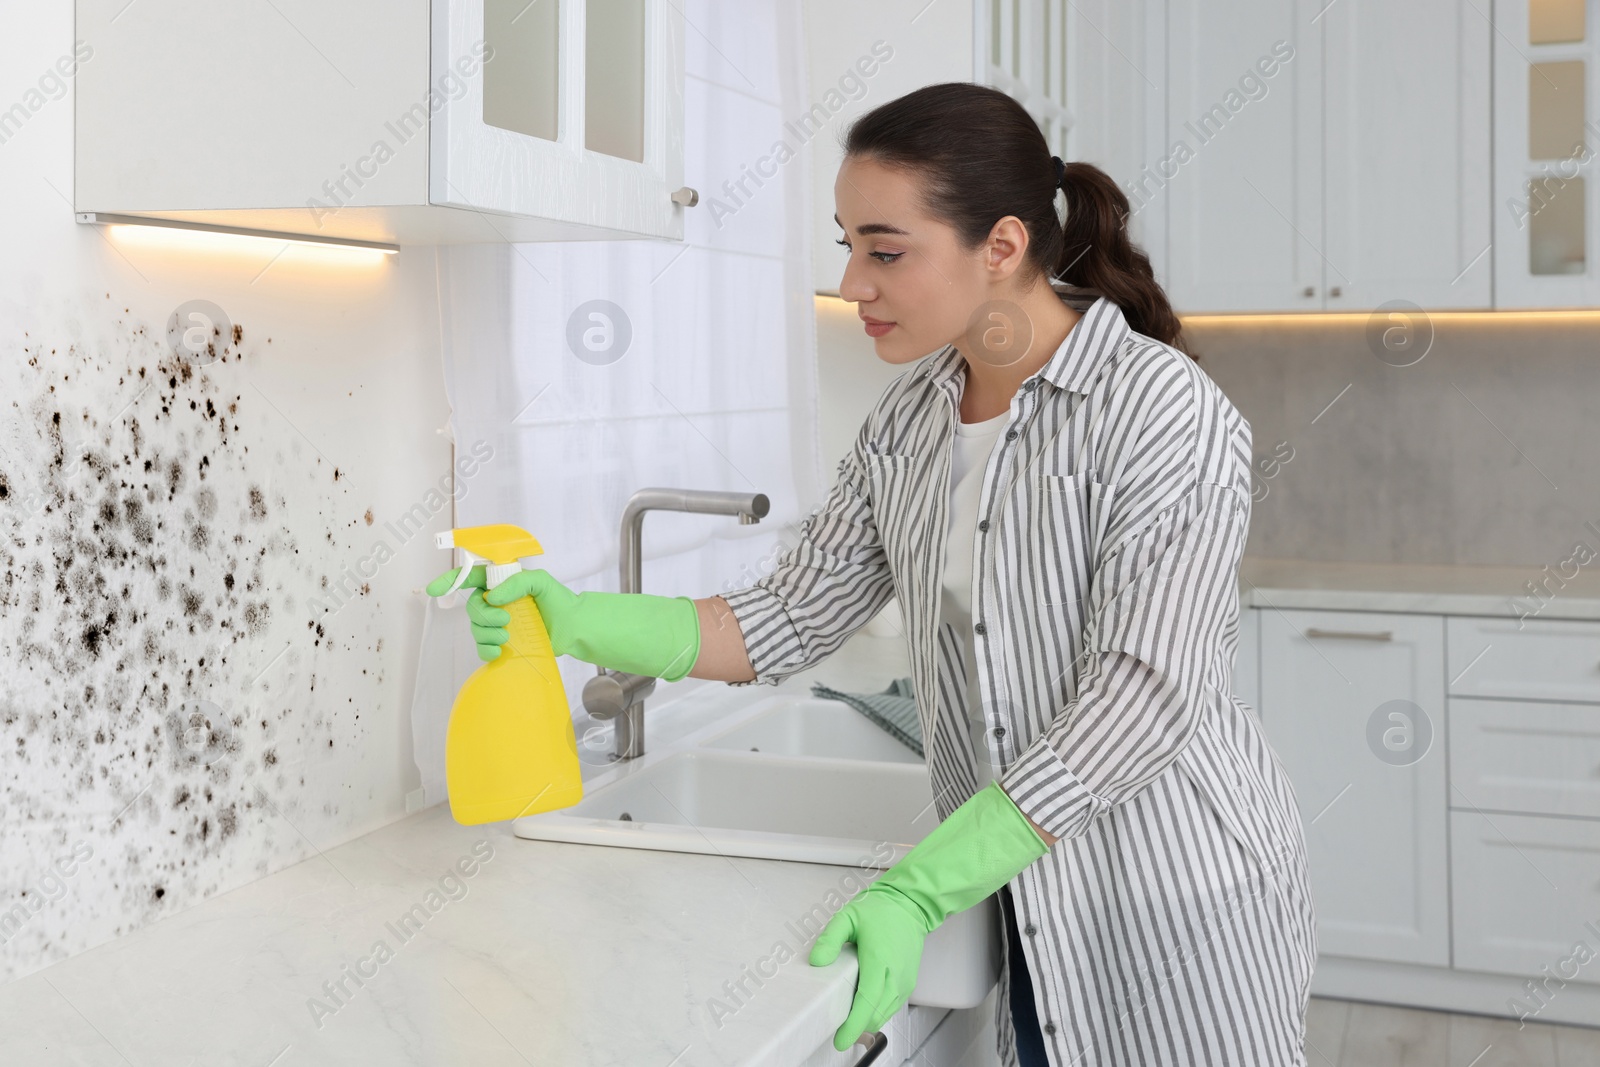 Image of Woman in rubber gloves using mold remover on wall in kitchen